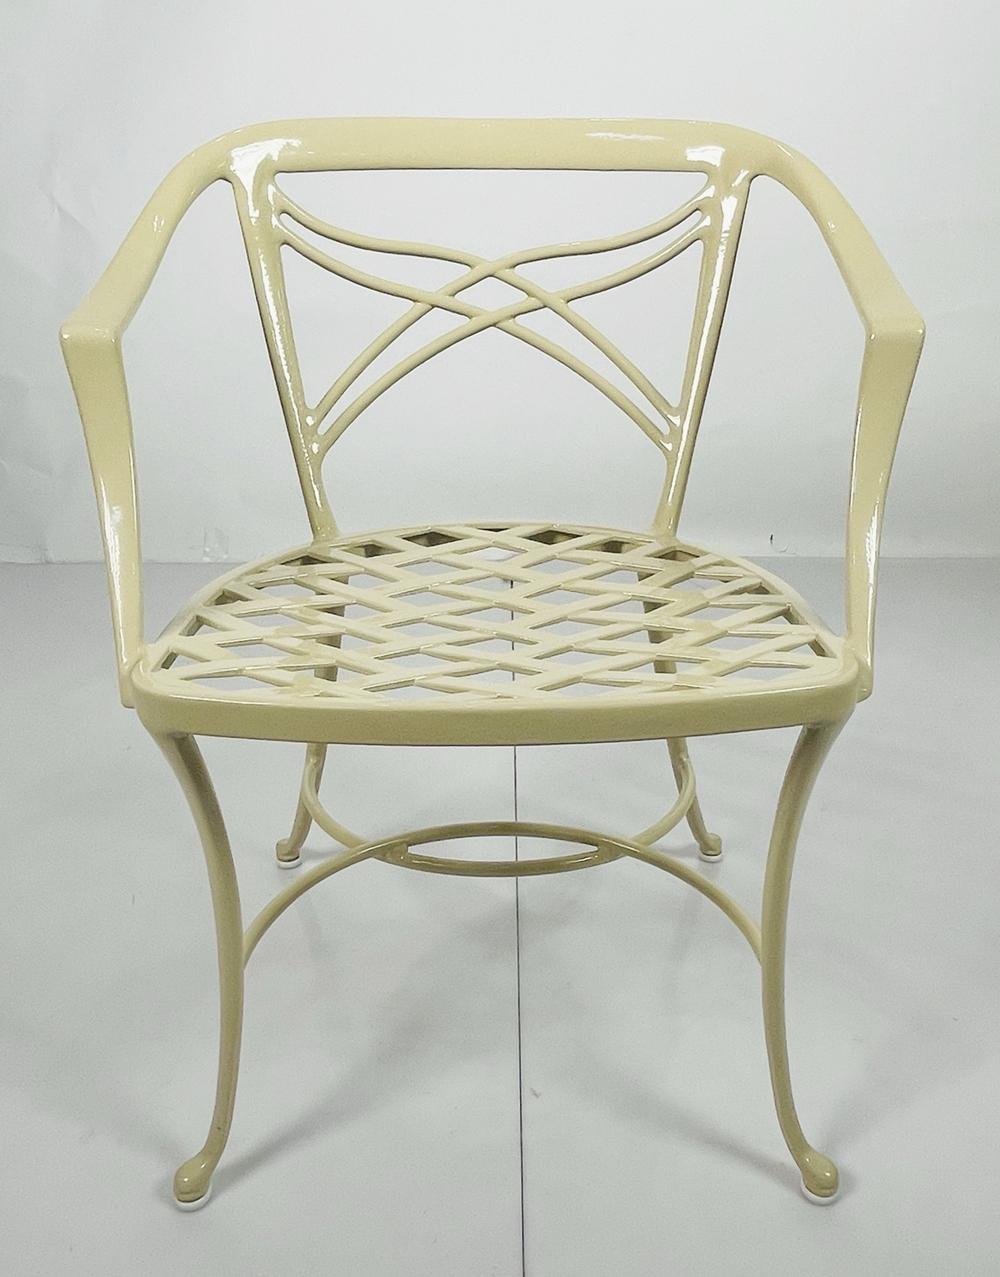 Set of 6 Patio/Dining Arm Chairs by Brown-Jordan, USA 1970's For Sale 6